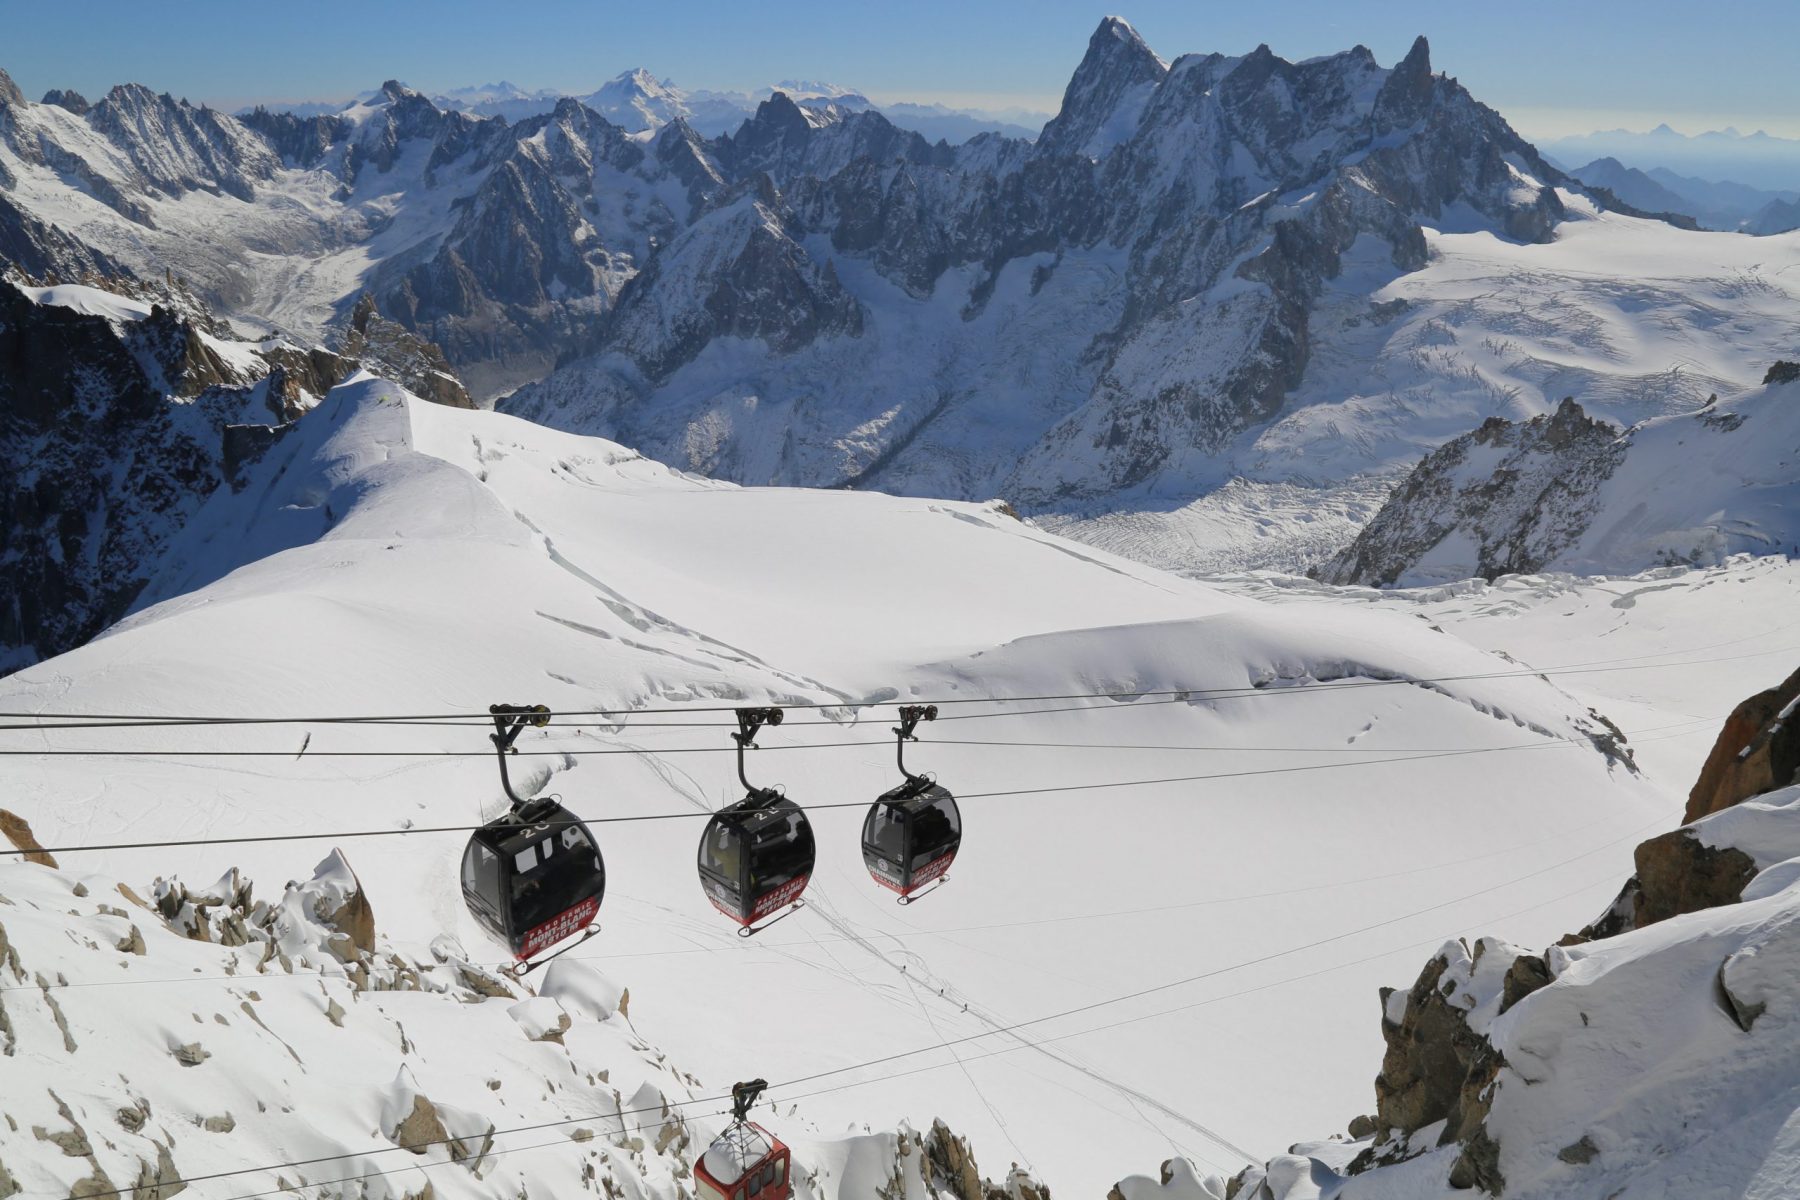 Telecabine Panoramic Mont Blanc. This cablecar connects Aiguille du Midi with Punta Helbronner in Italy. Photo: Salome Abrial. TO Chamonix. Must-Read Guide to Chamonix.